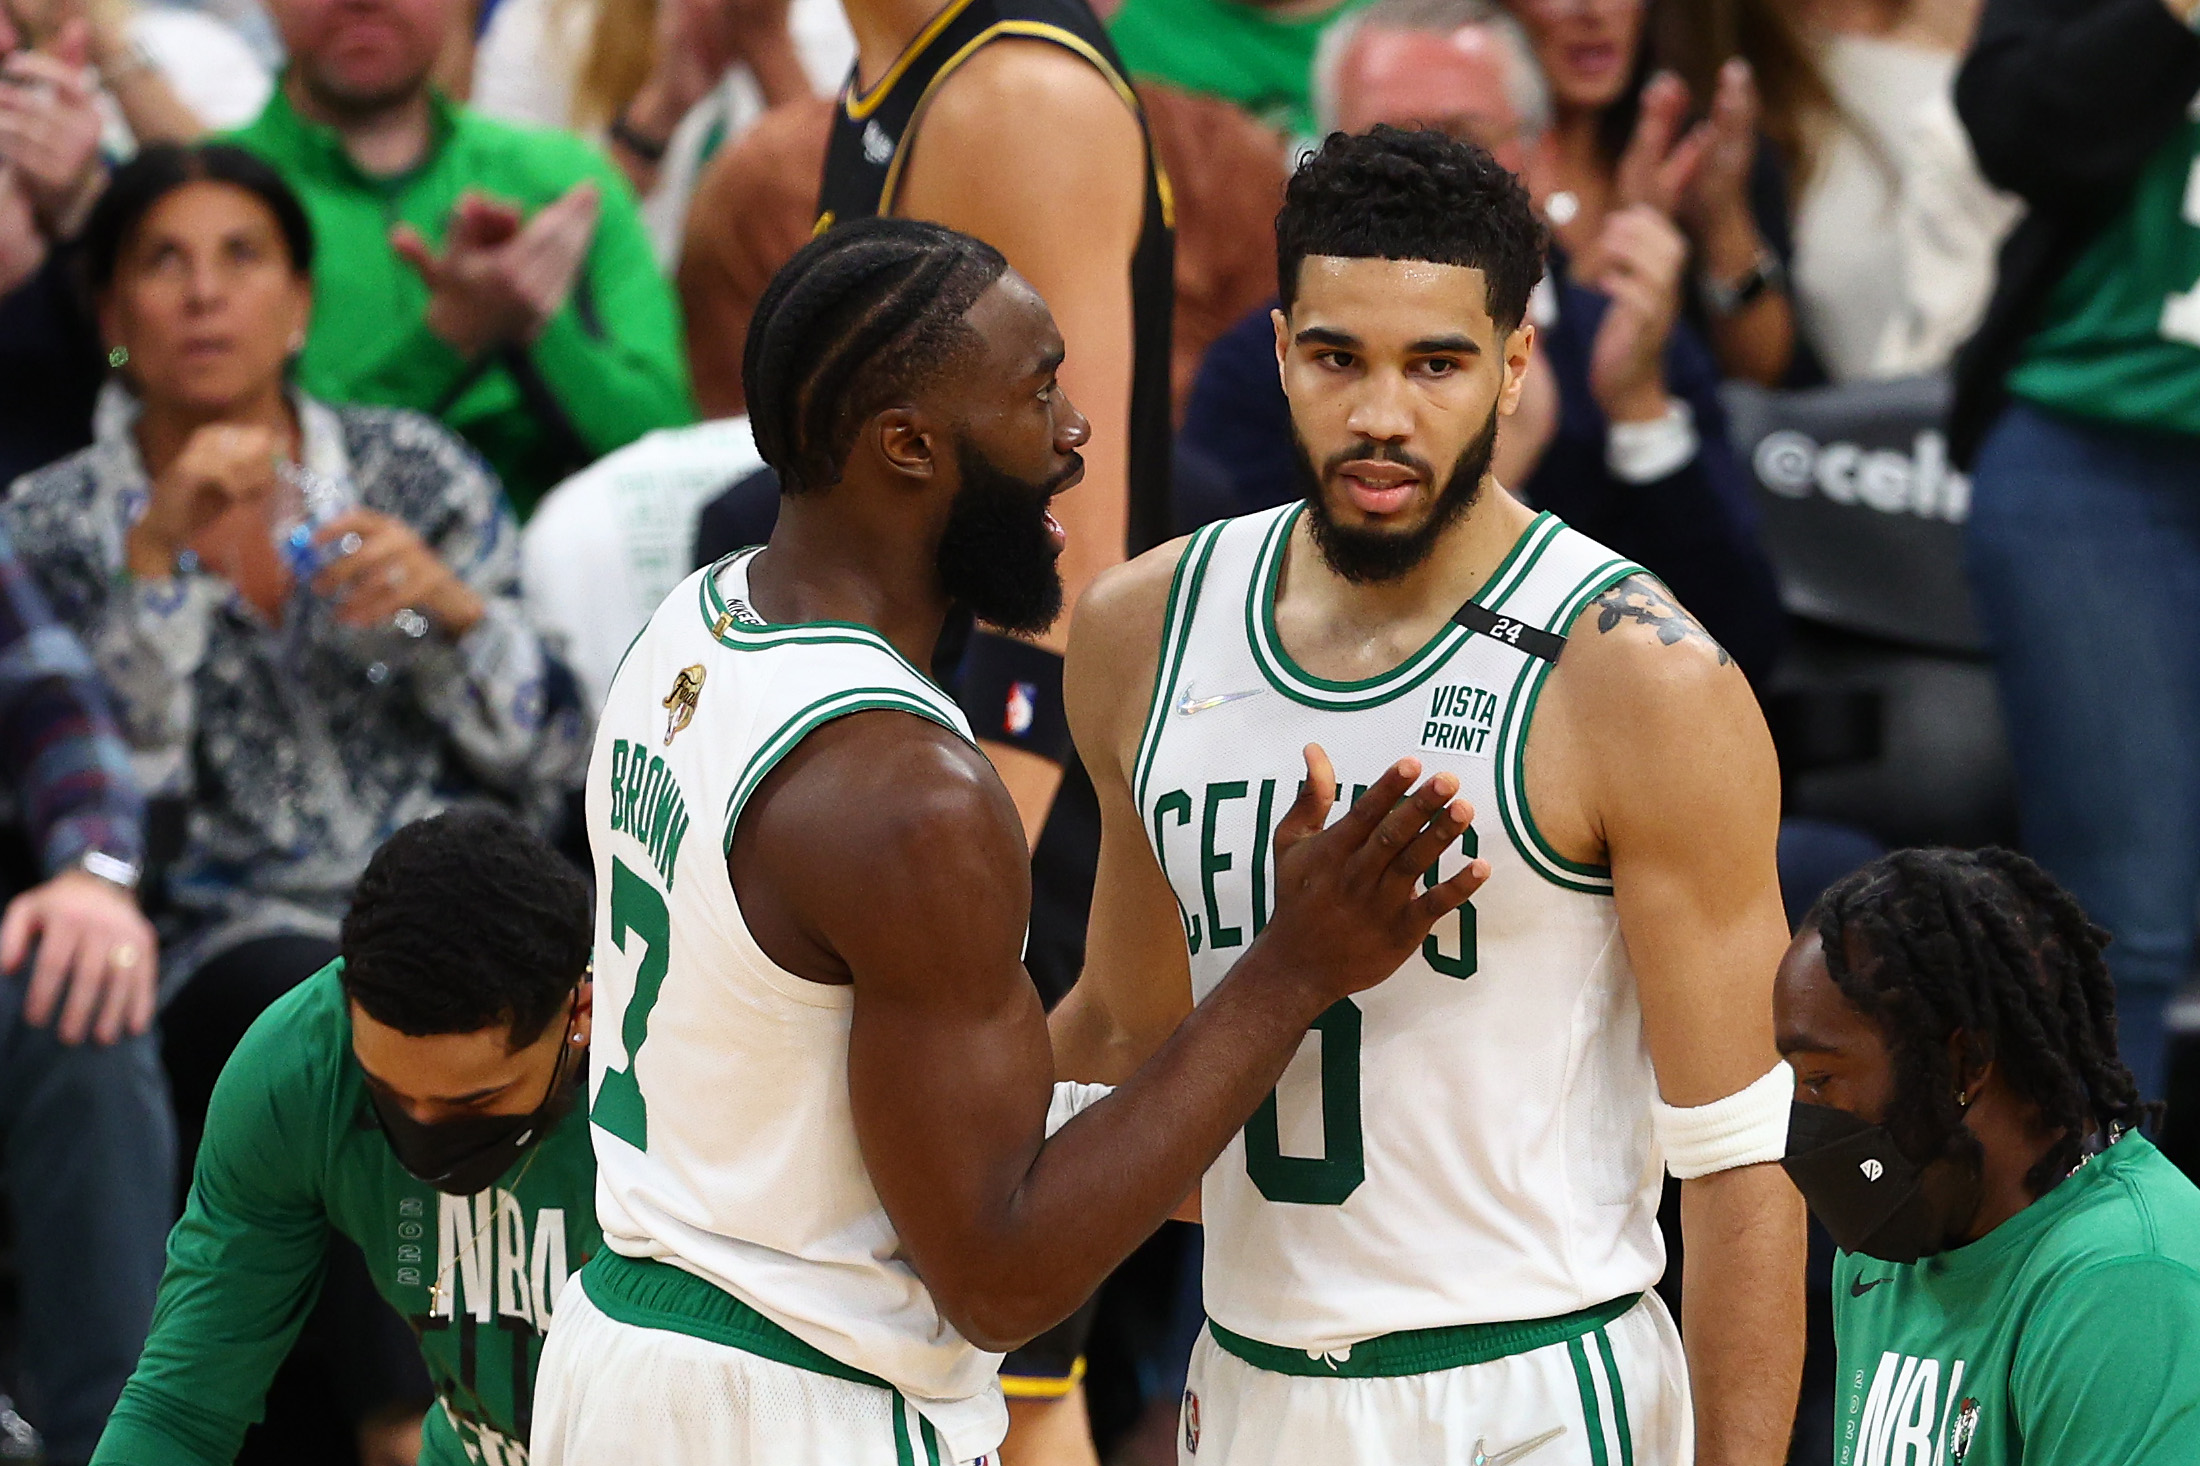 Taking a look at the status of the Celtics' roster